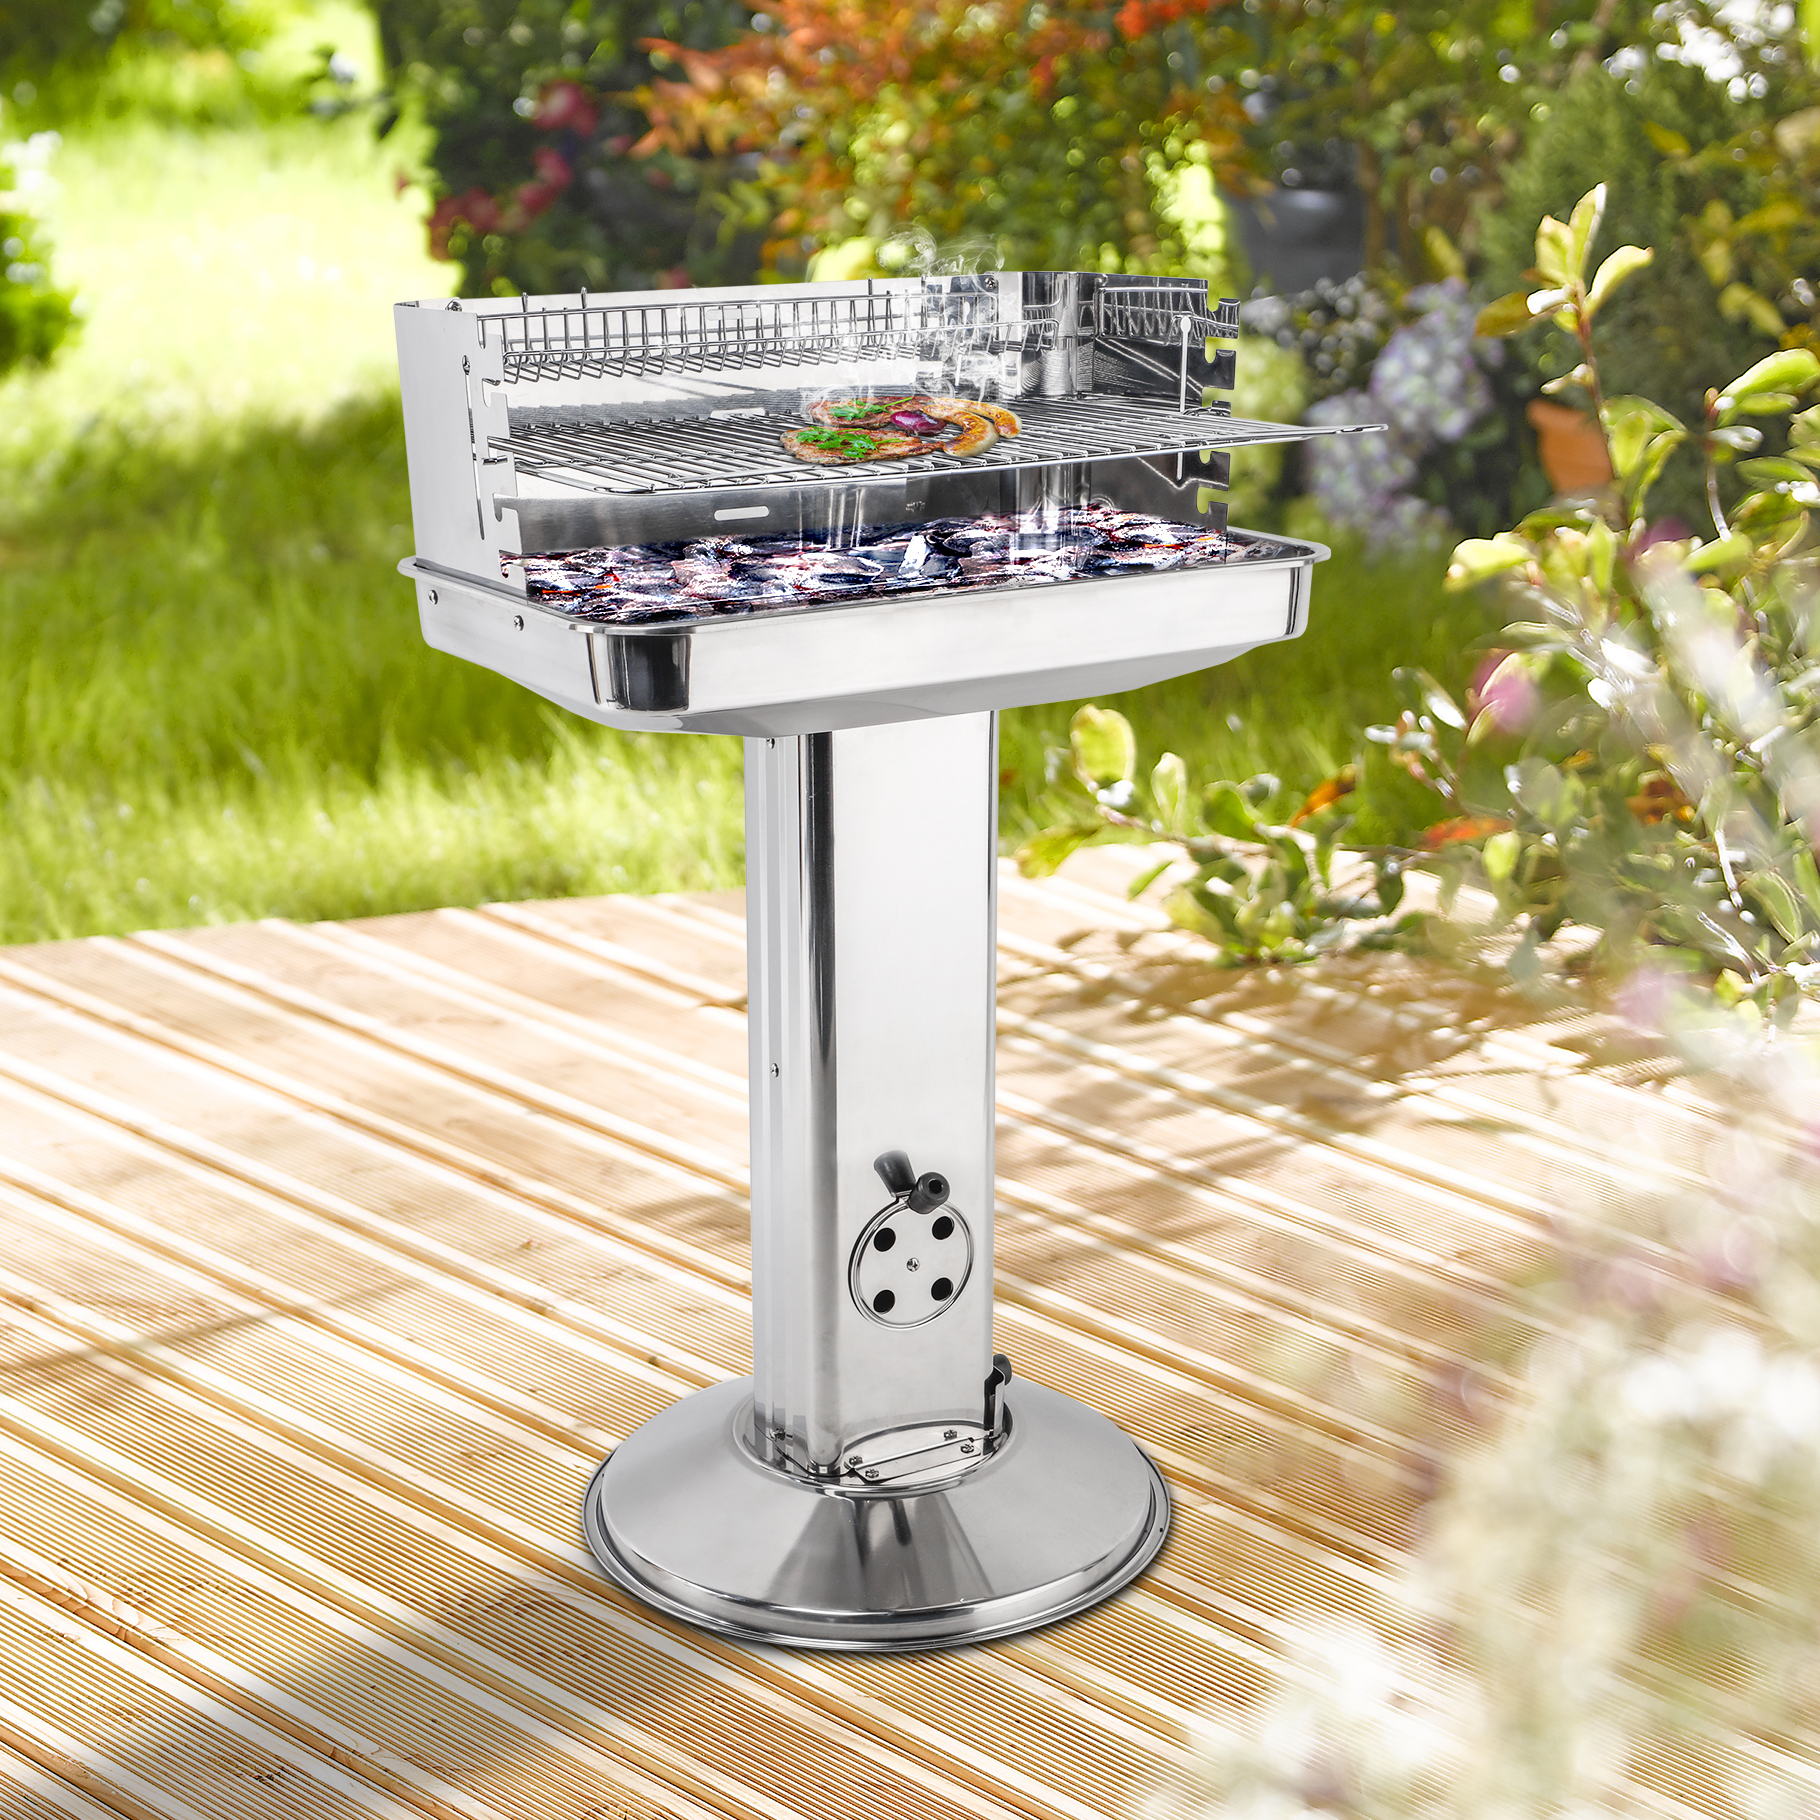 Product category - Grills & Accessories